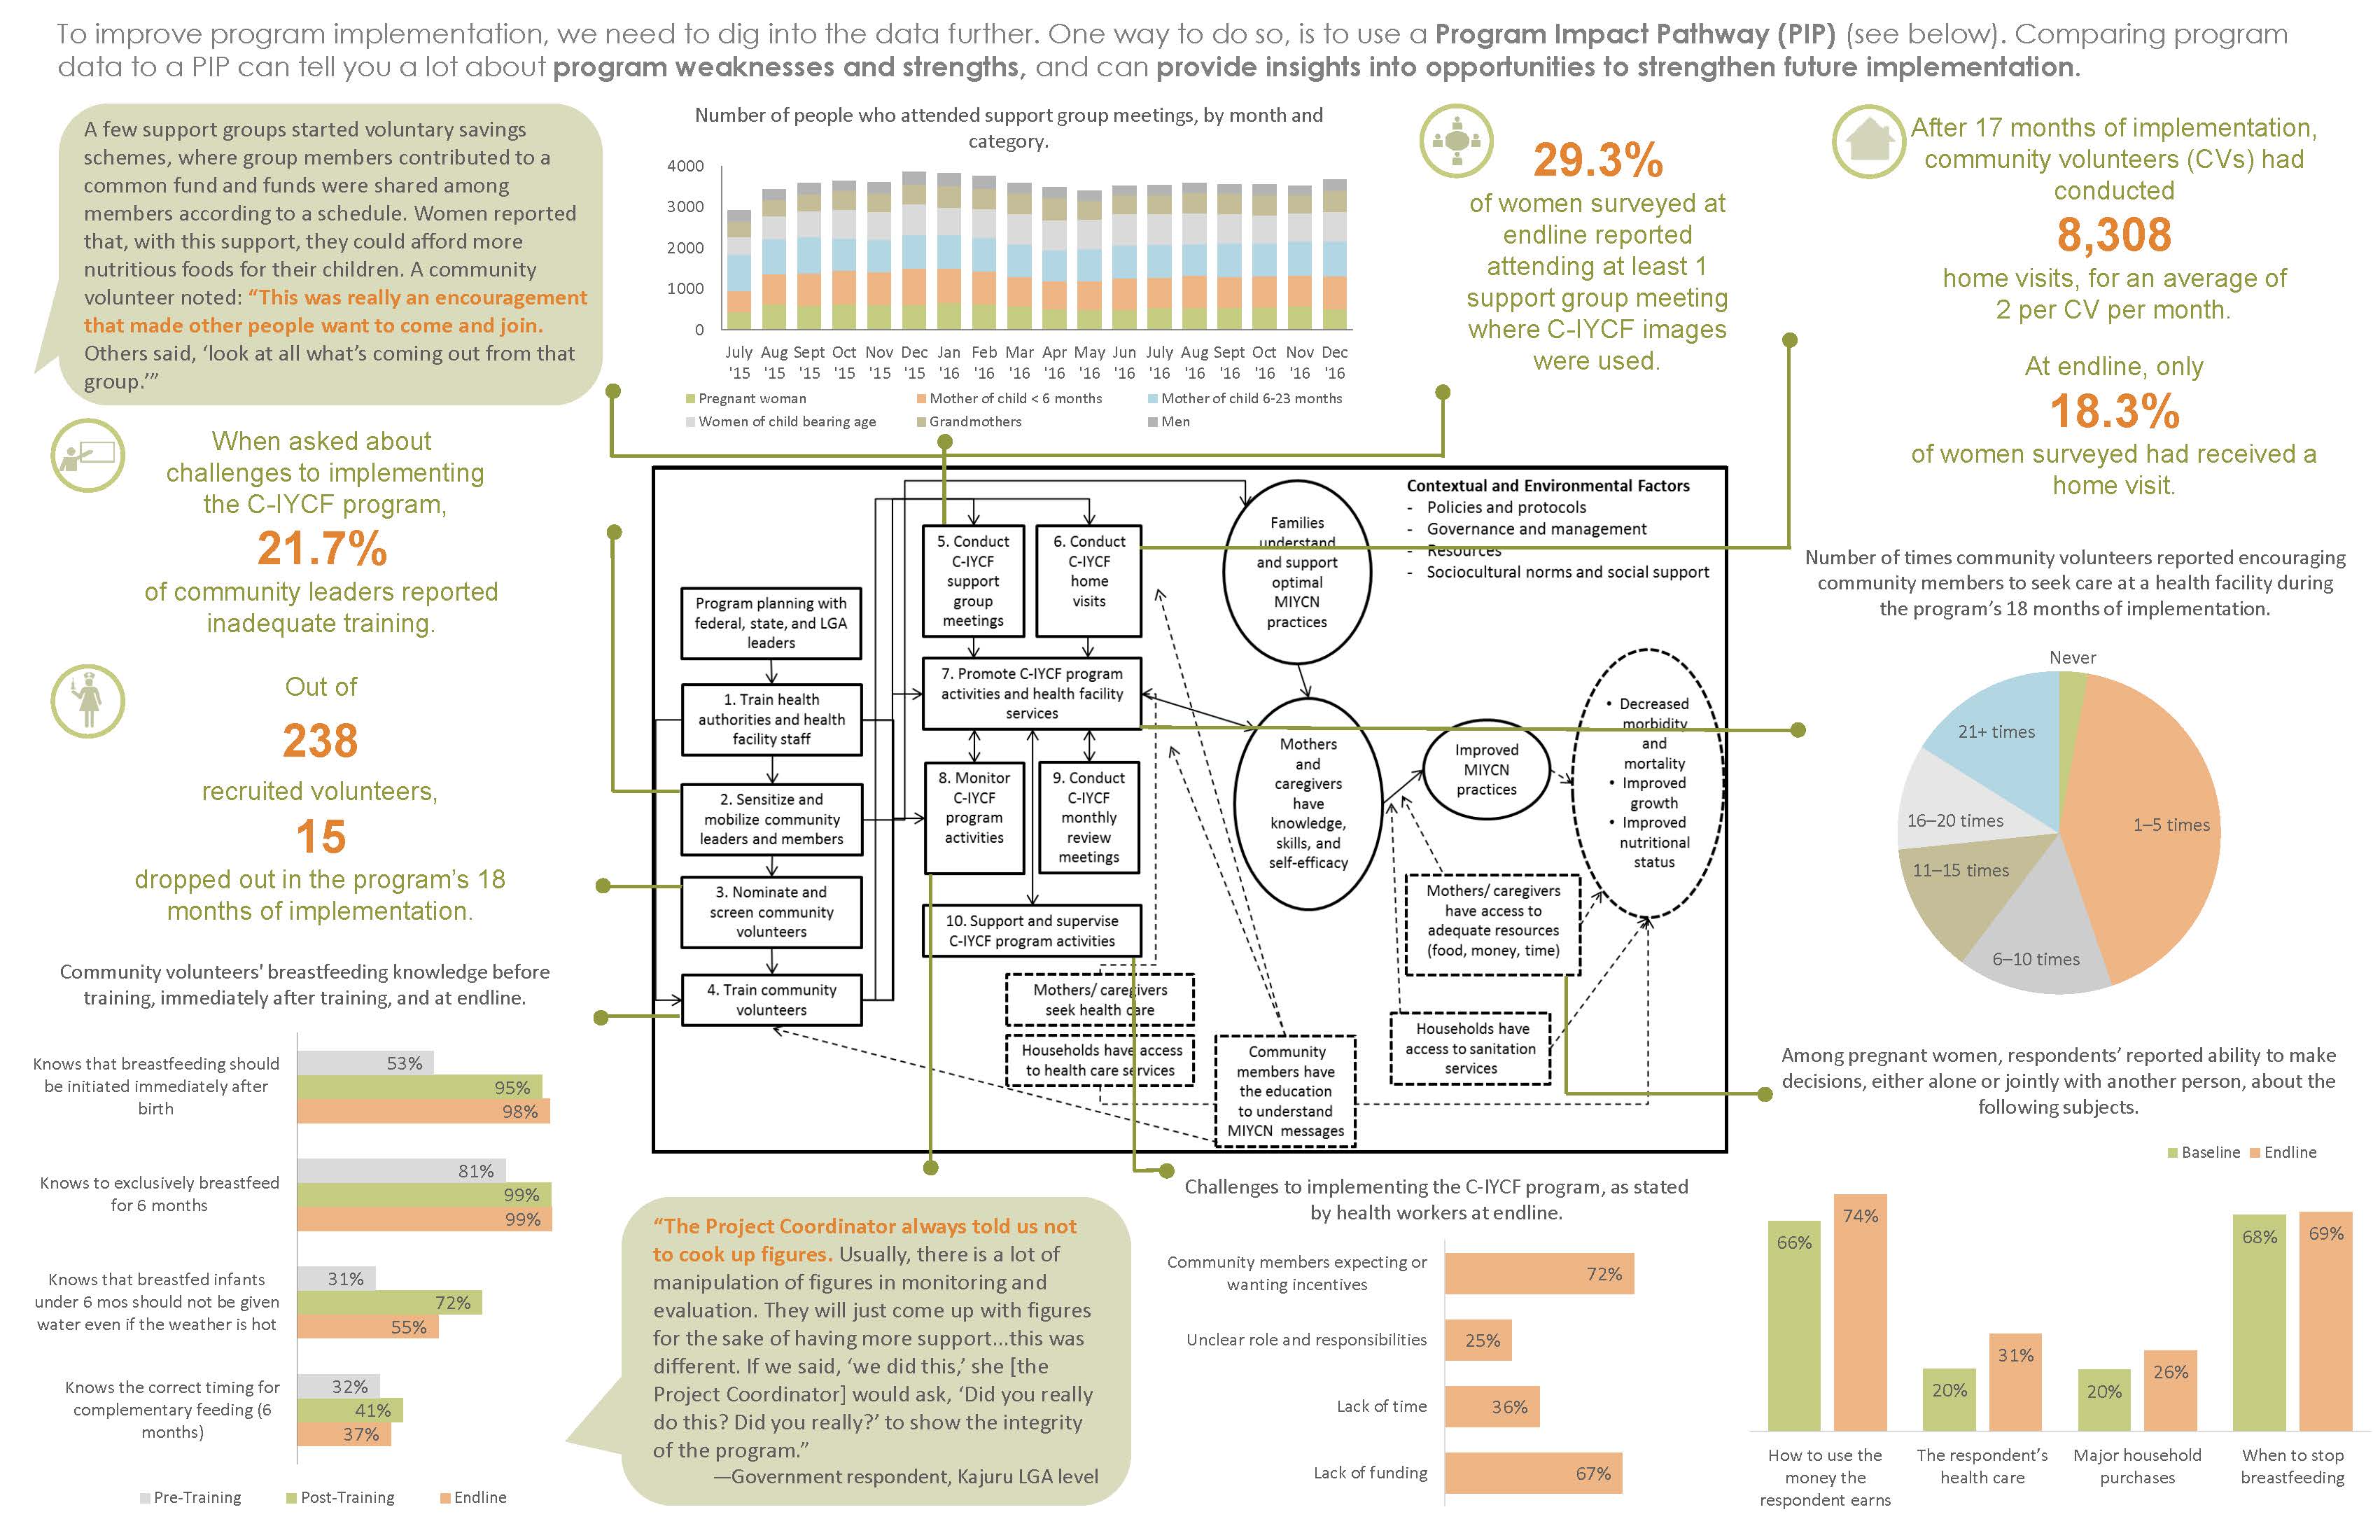 Image of the infographic, see PDF for full alternate text